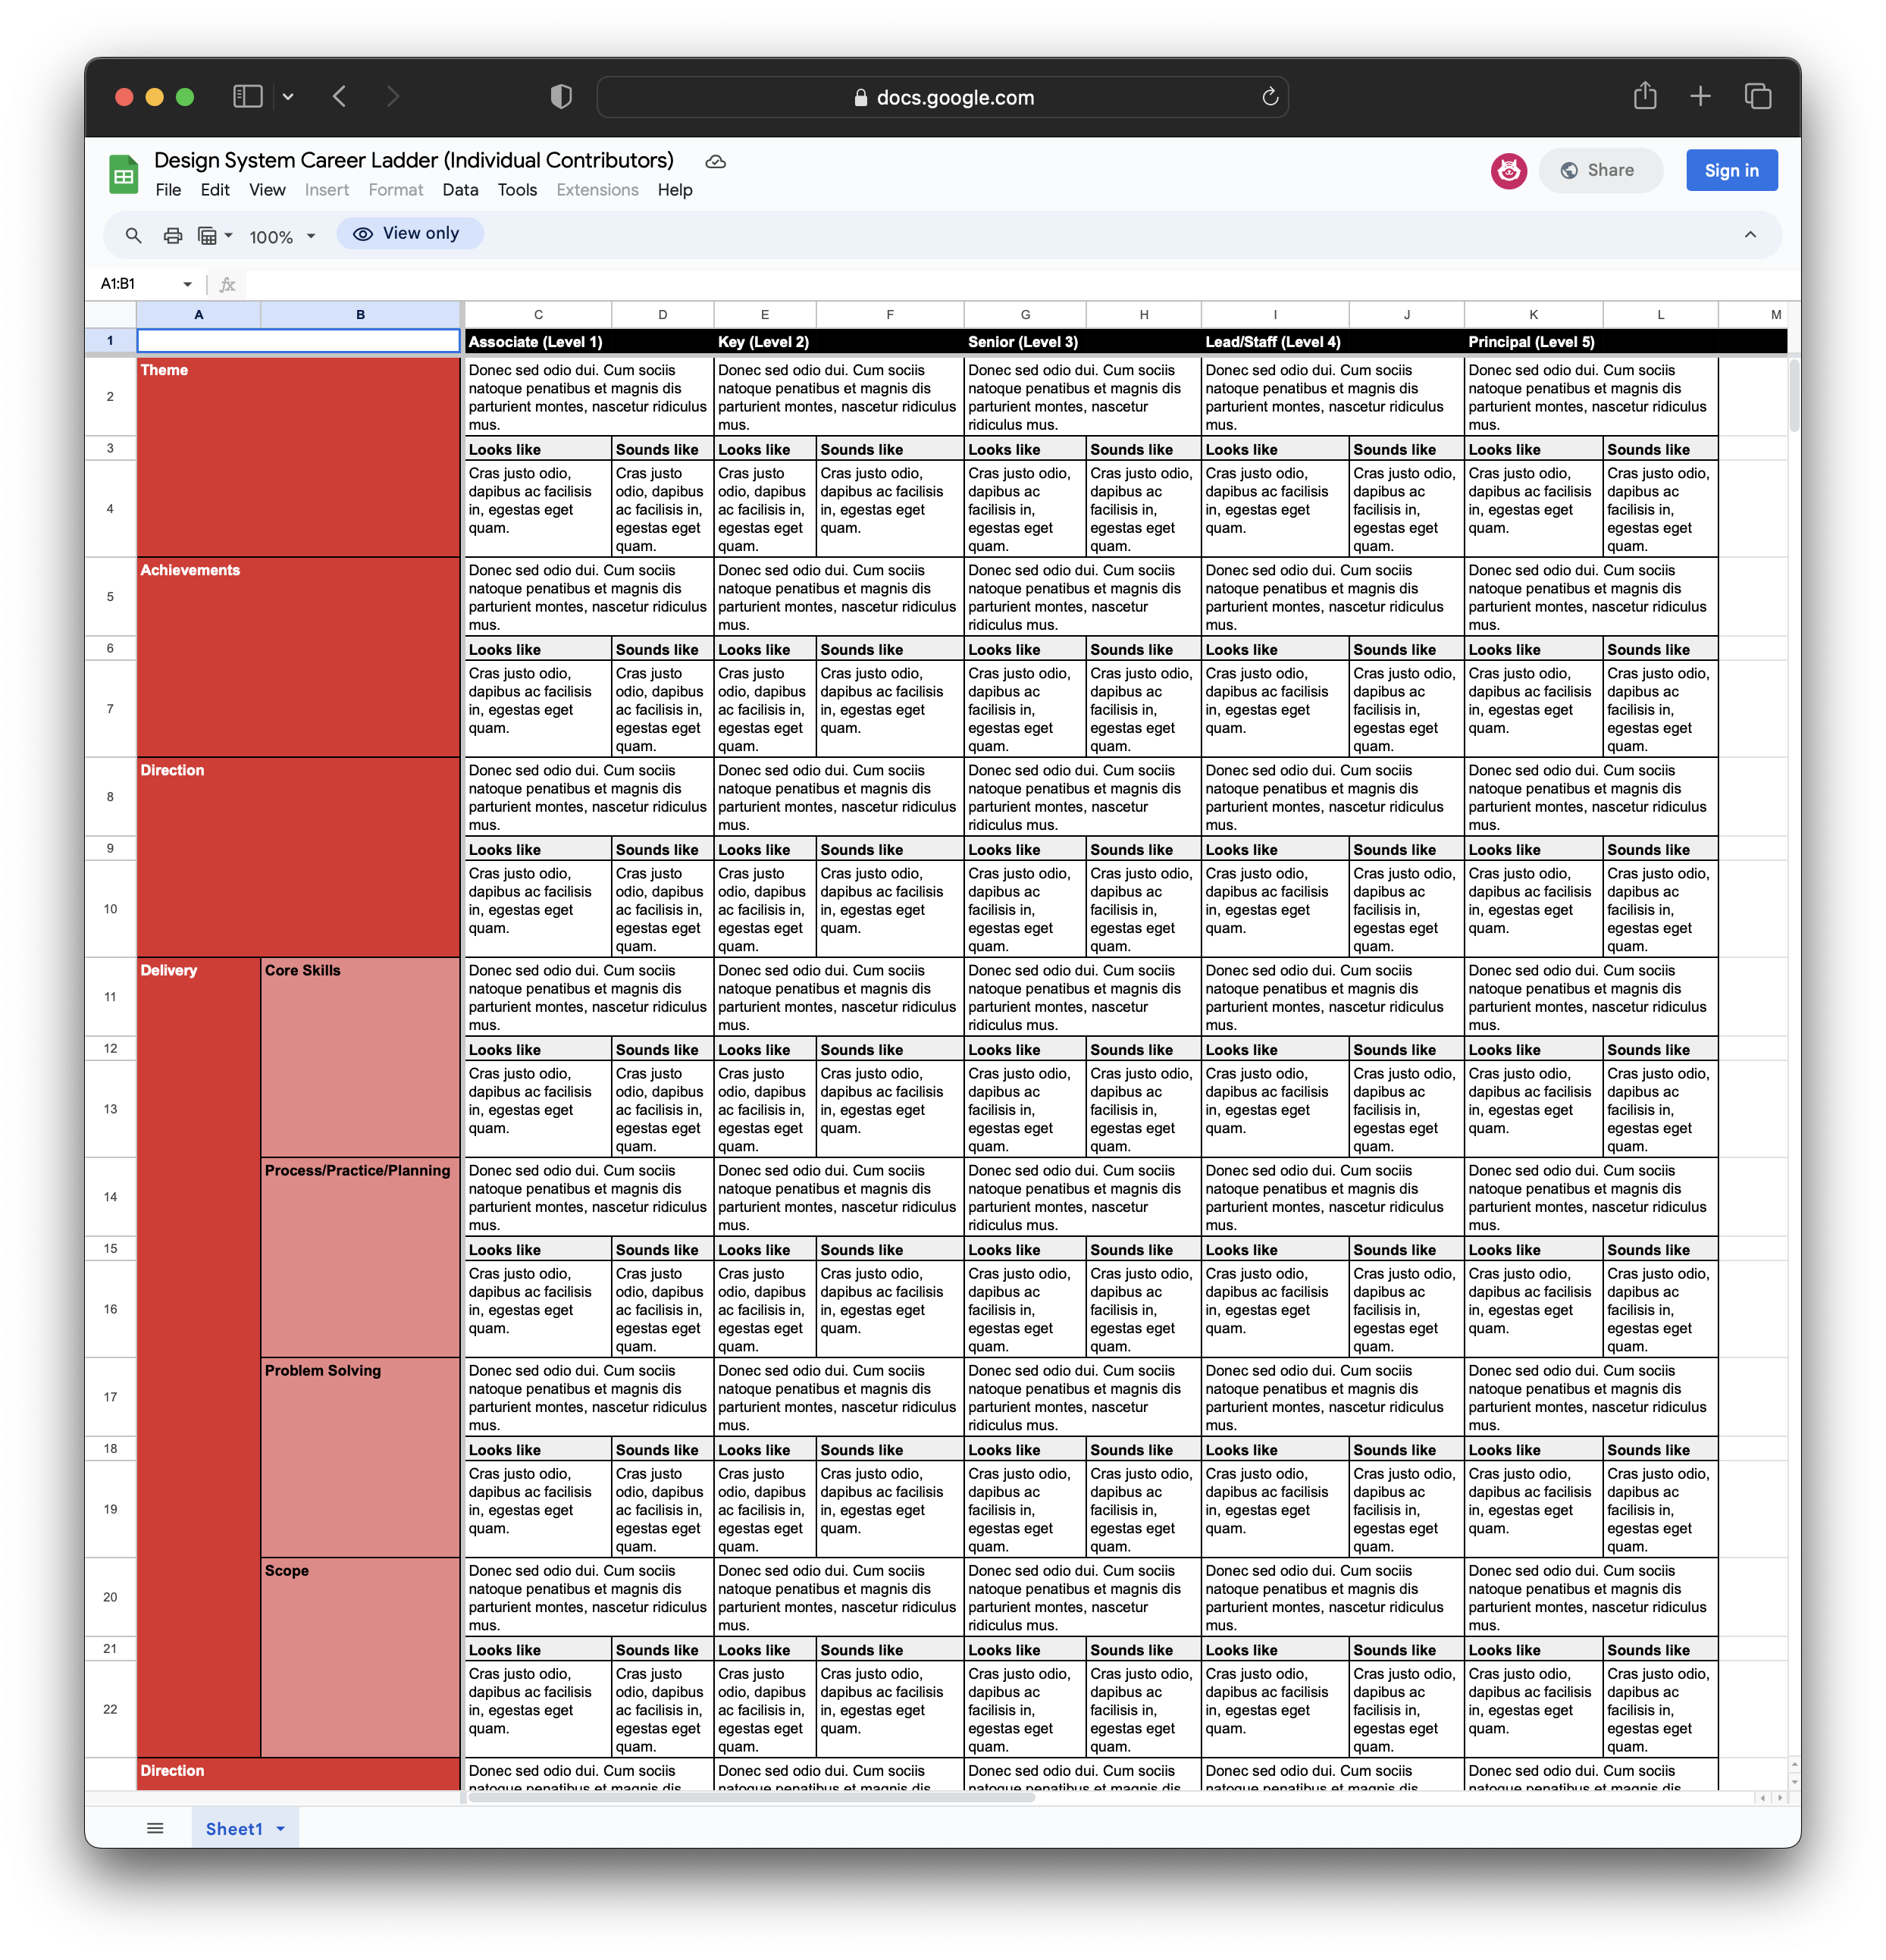 A Google Sheet that collects all the criteria for a design system leveling framework